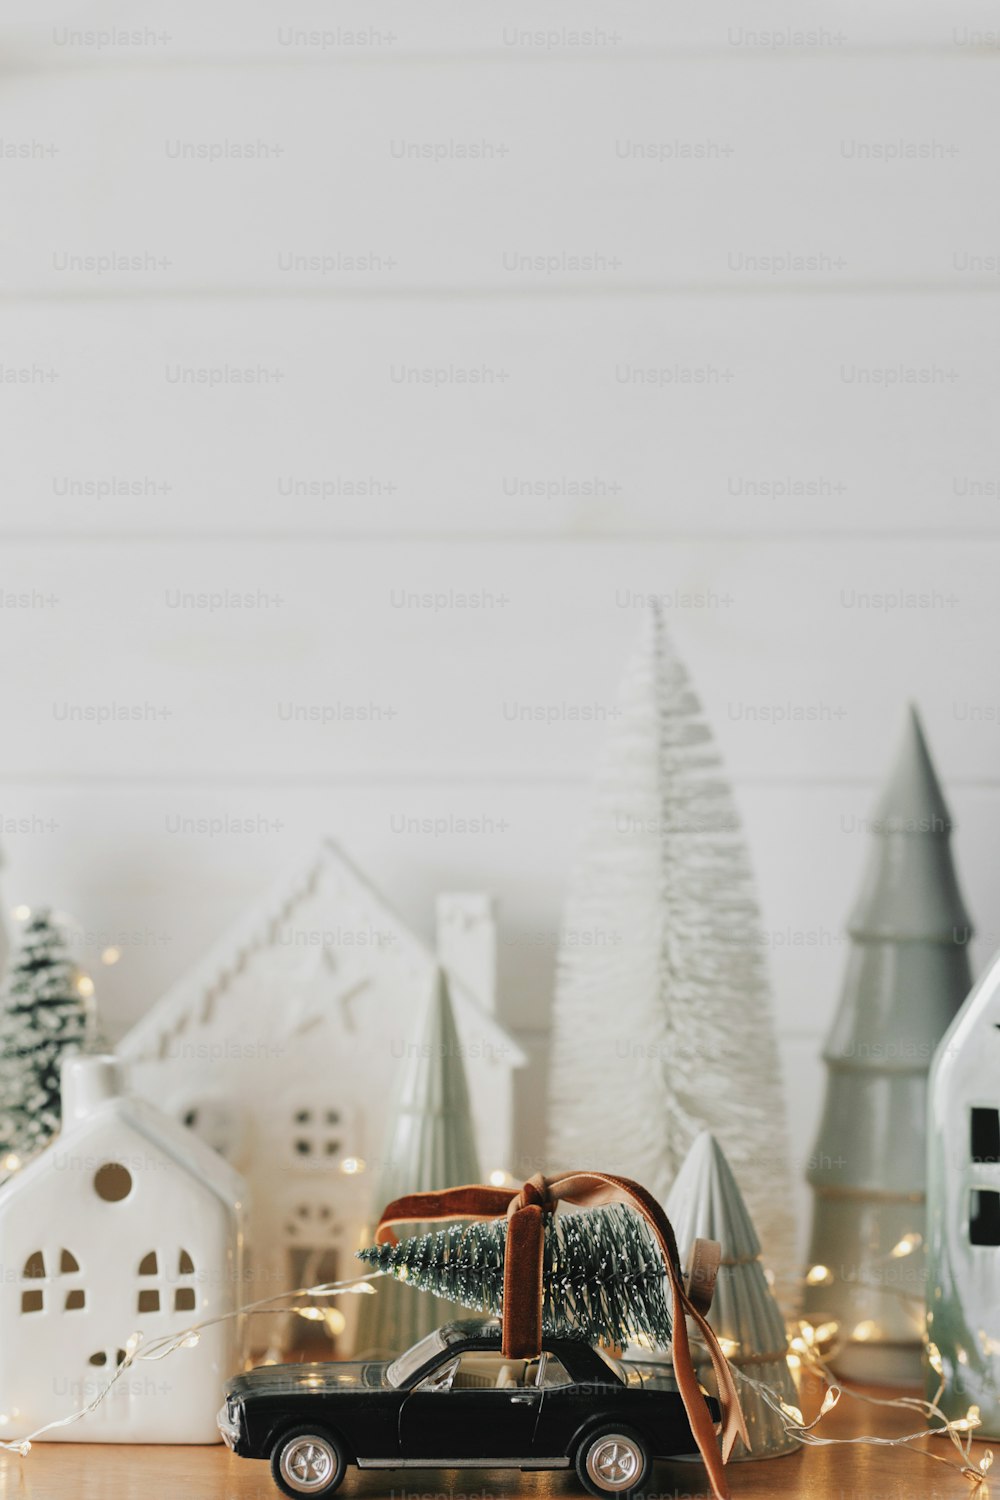 Merry Christmas and Happy New Year! Festive Christmas scene, miniature holiday village. Car with christmas tree, little houses and snowy trees on white background. Styling Christmas sideboard